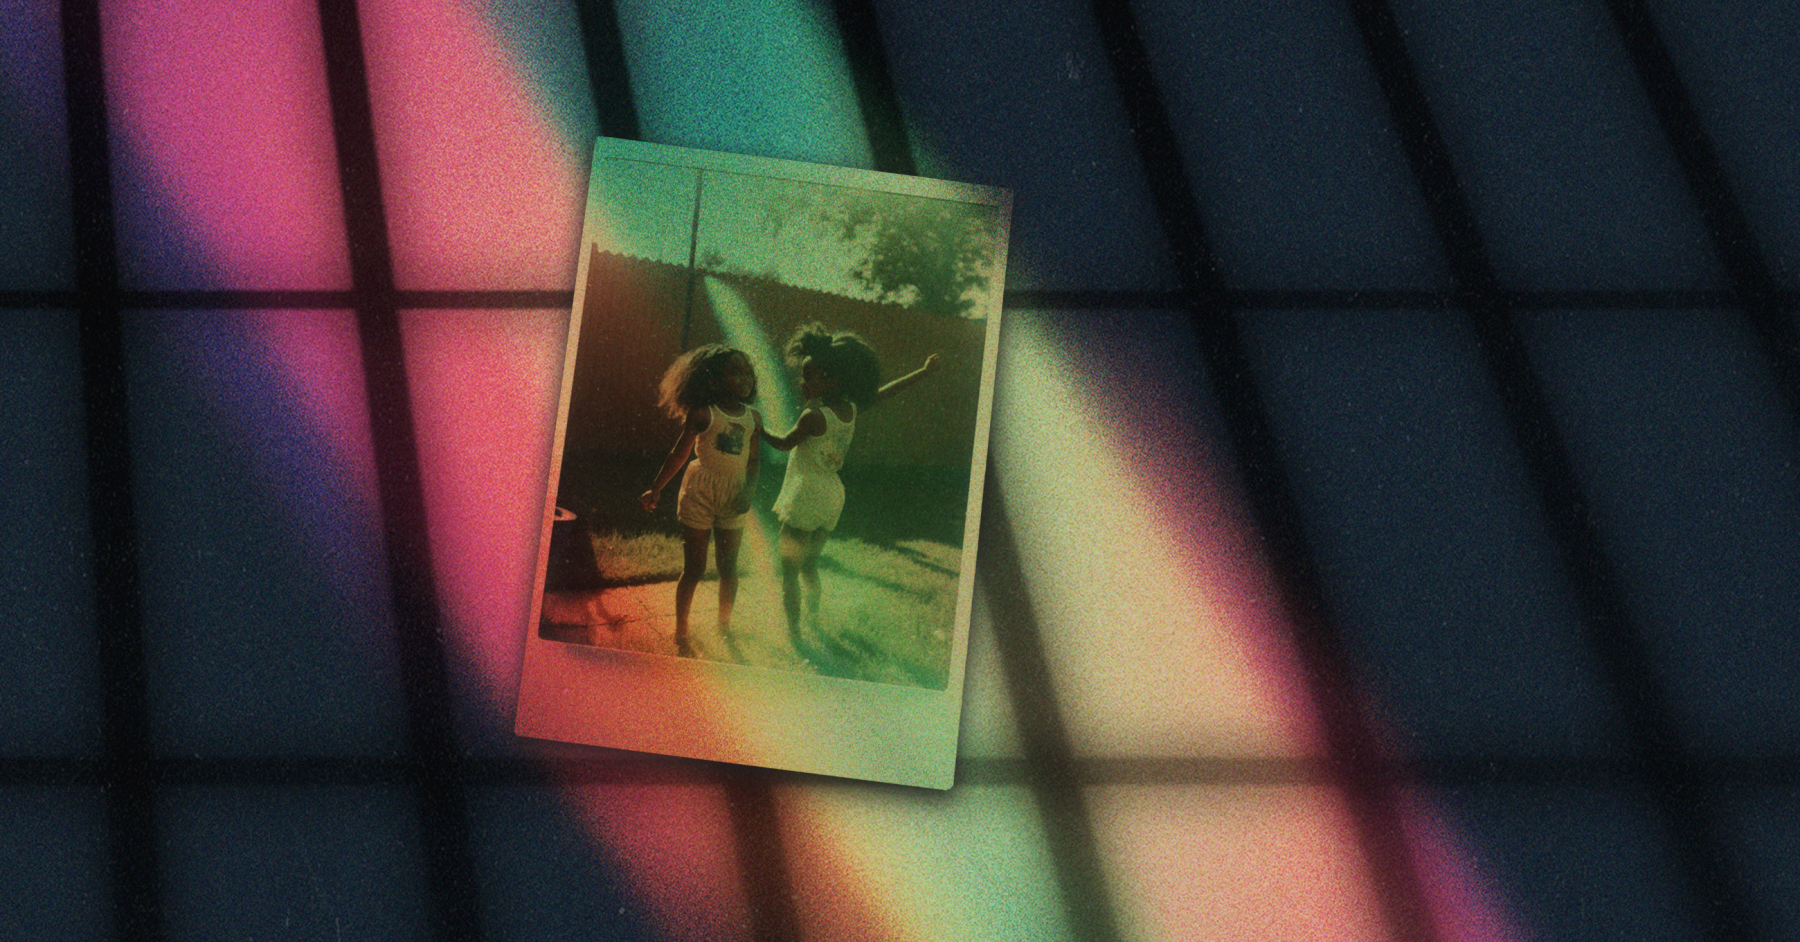 A polaroid photograph of two young Black girls playing in a sprinkler. A shadow of prison bars is cast on the photo and on the background behind with rainbow-colored beam of light.